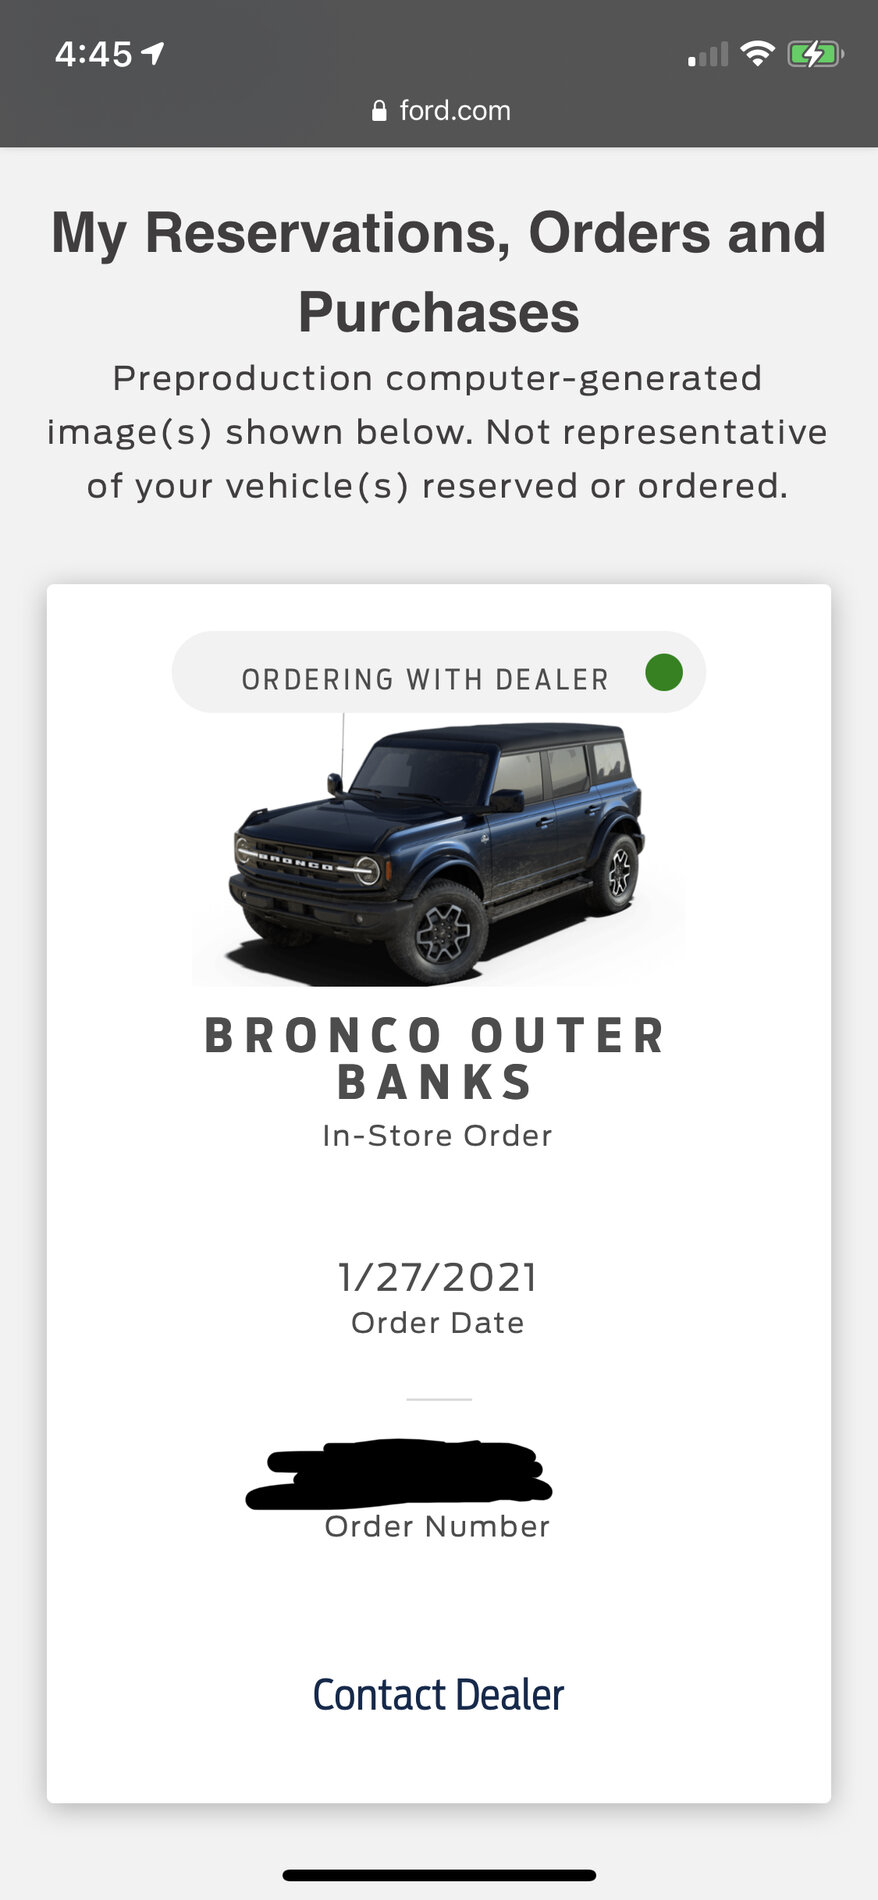 Ford Bronco New Green Dot + "Ordering With Dealer") showing on Ford.com My Reservations Page 471C3F82-40D2-4811-8A6E-C1543D94DB5F